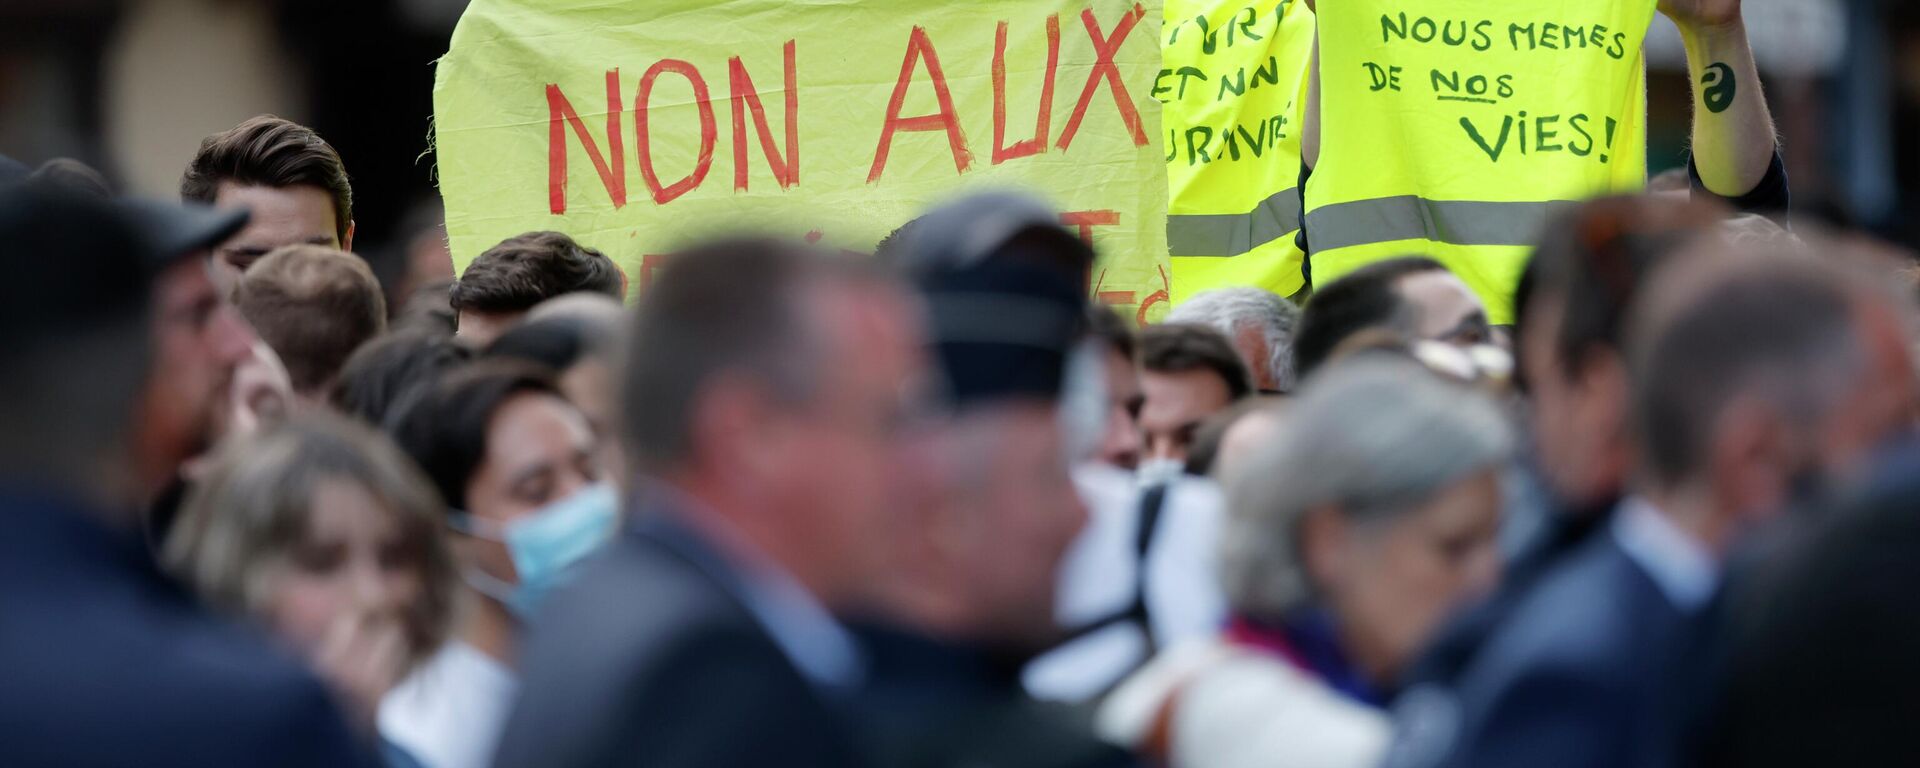 Protestors hold a yellow vest reading: we decide our own lives, before a campaign rally of Current French President and centrist presidential candidate for reelection Emmanuel Macron, in Strasbourg, eastern France, Tuesday, April 12, 2022 .  - Sputnik International, 1920, 24.04.2022